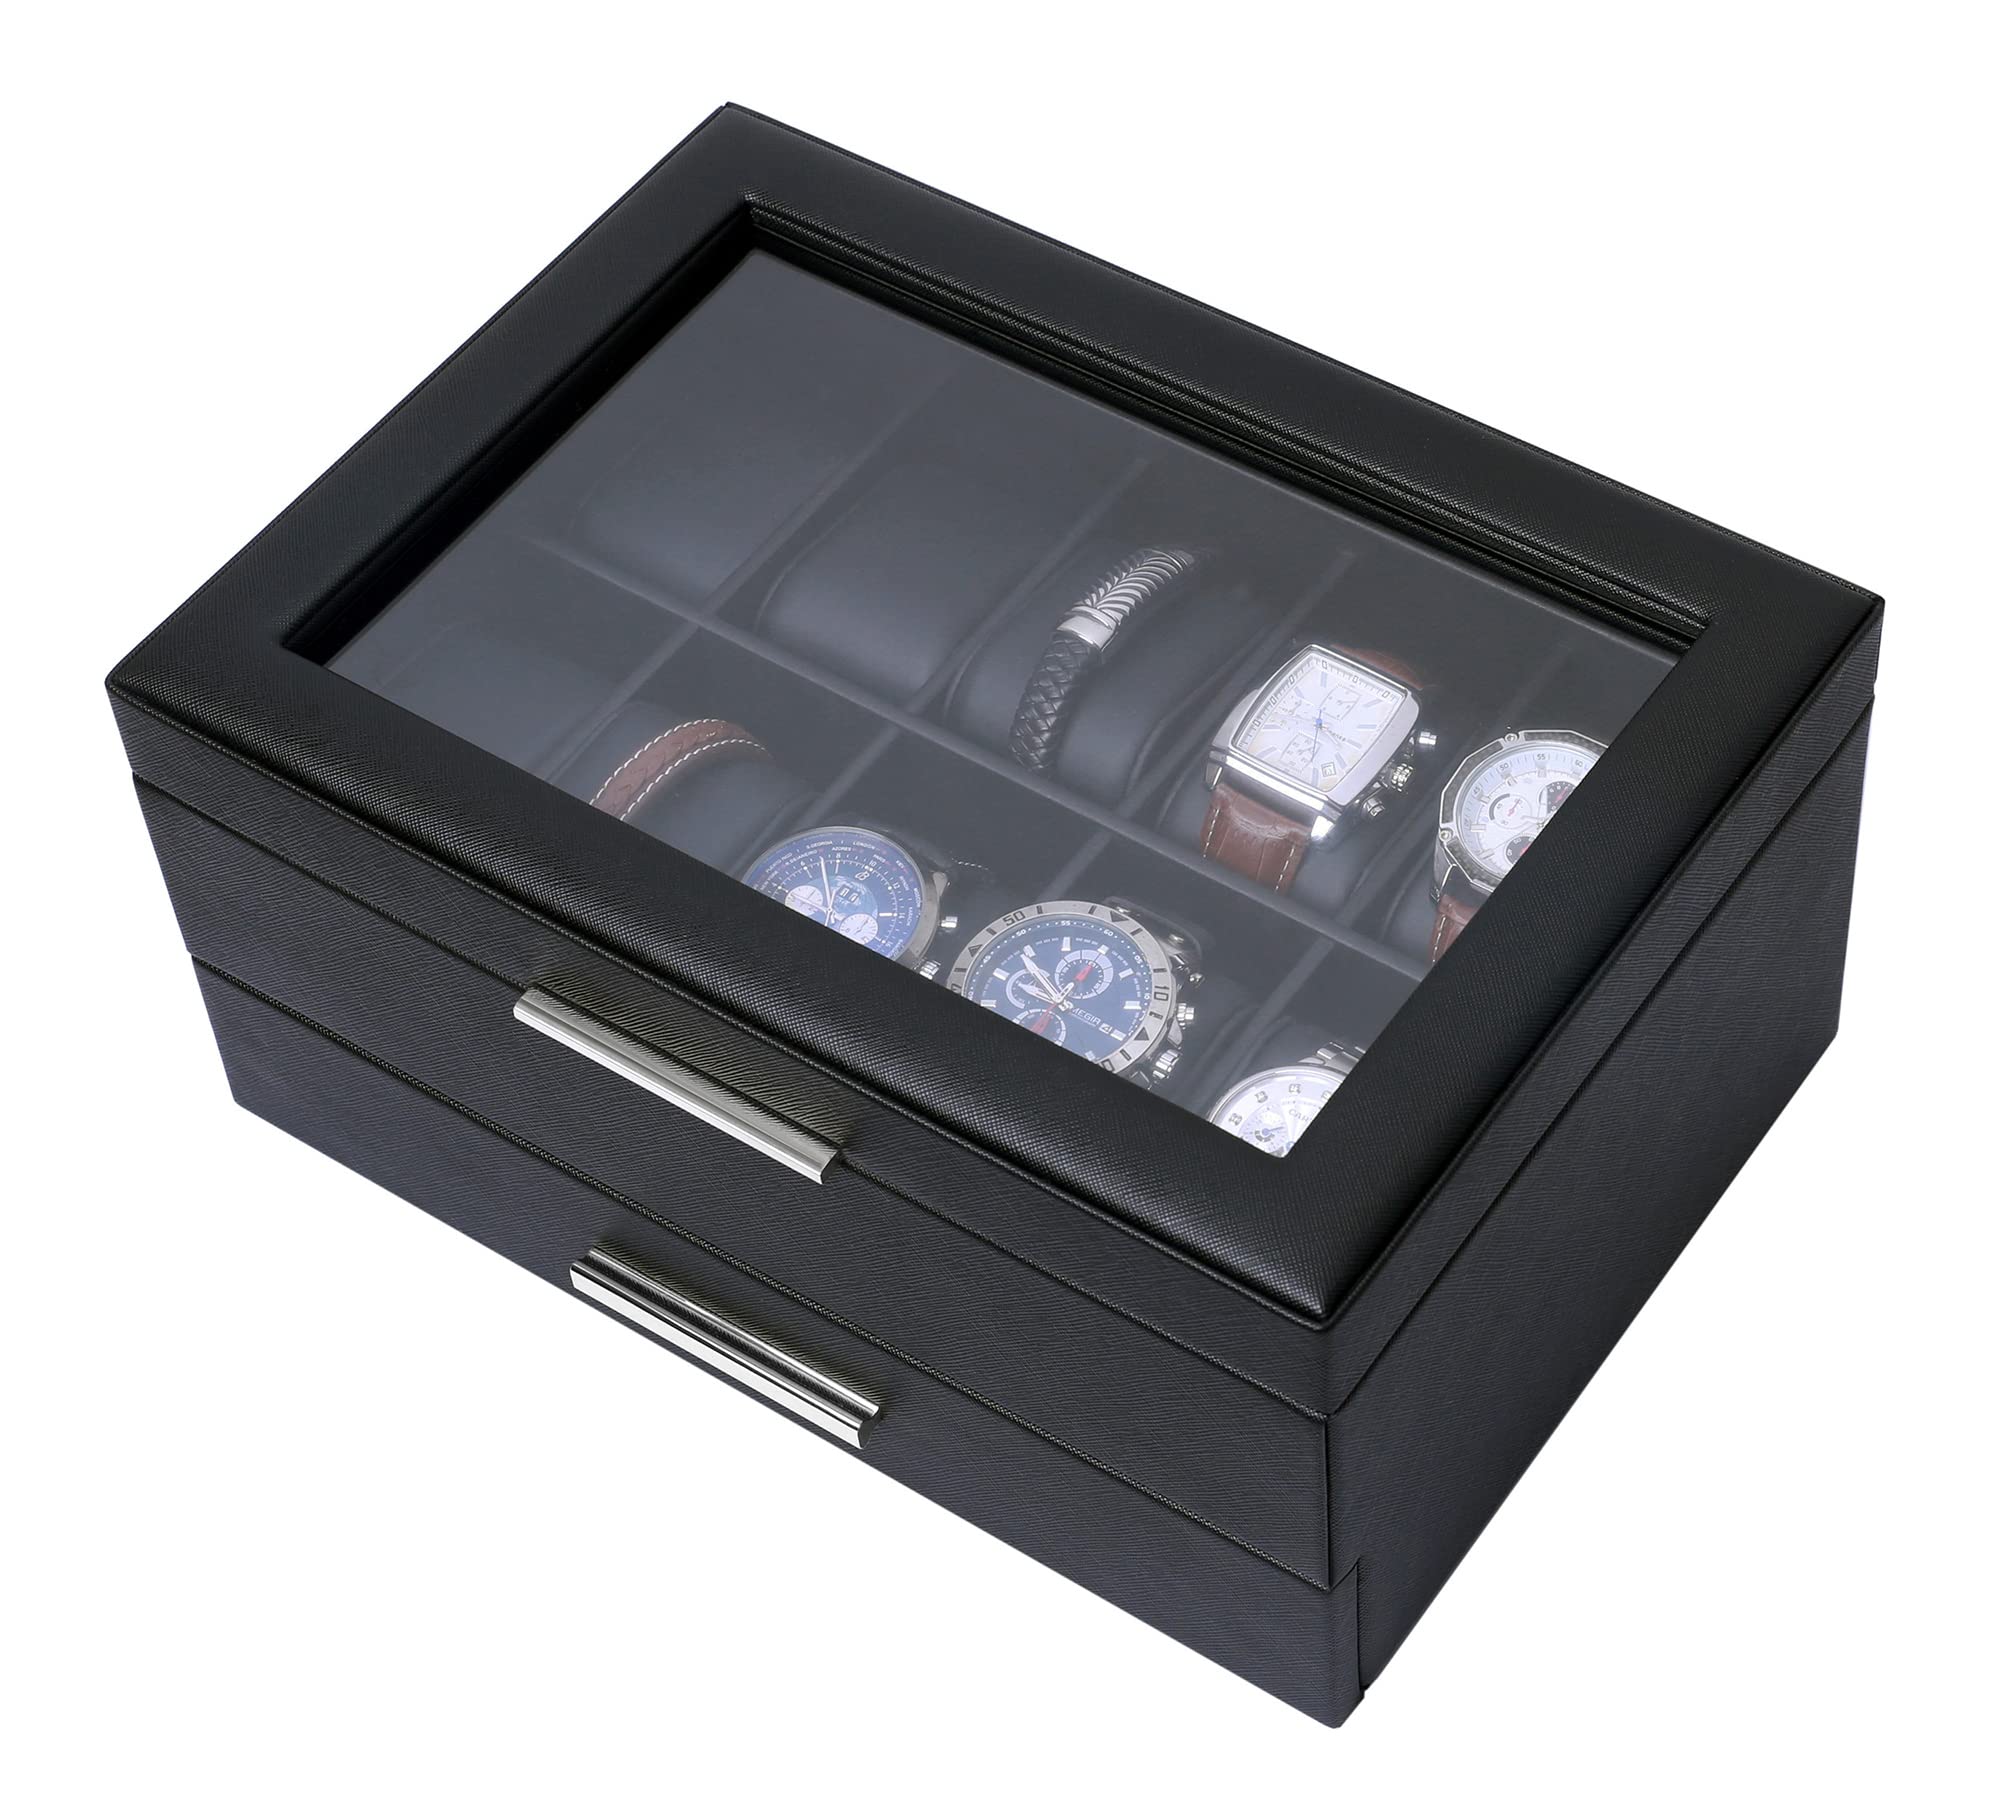 Lifomenz Co Leather Watch Box with Drawer for Men Watch Jewelry Box Organizer,Watch Display Case Catchall Tray for Men Accessories Organizer,Watch Storage with Large Watch Holder